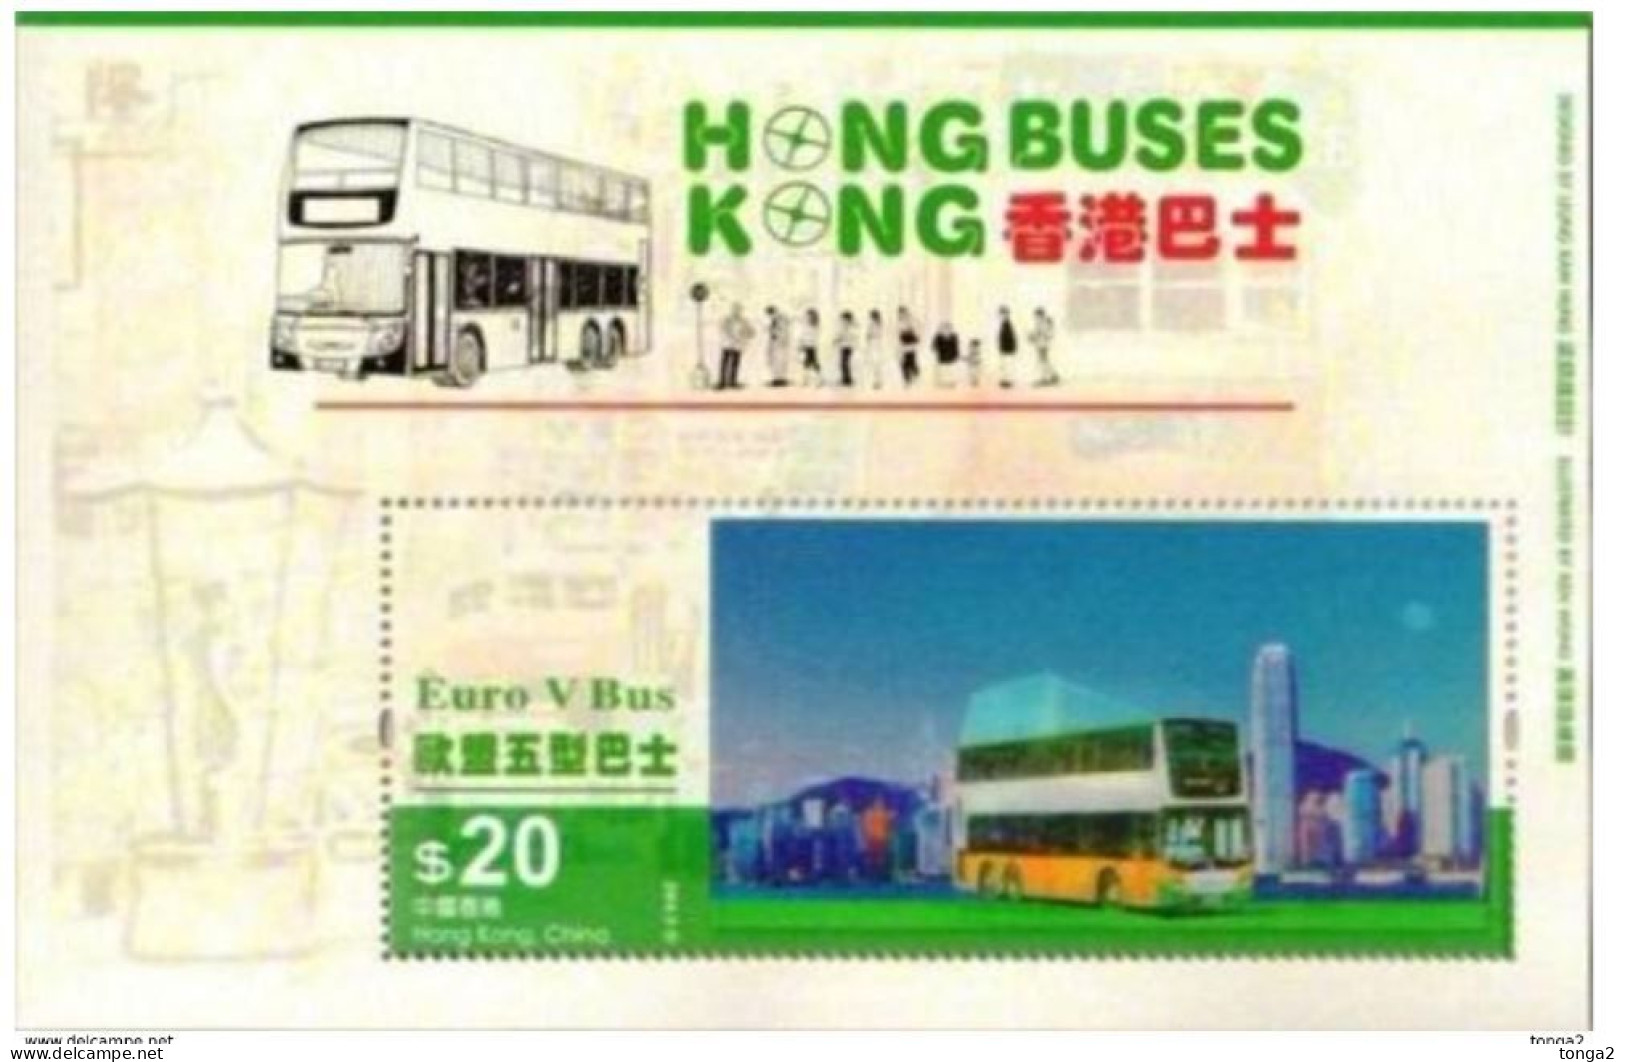 Hong Kong 2013 Bus S/S MNH - Stamp Shows Lenticular Movement - 3-D Pictures Move - Unusual - Bussen